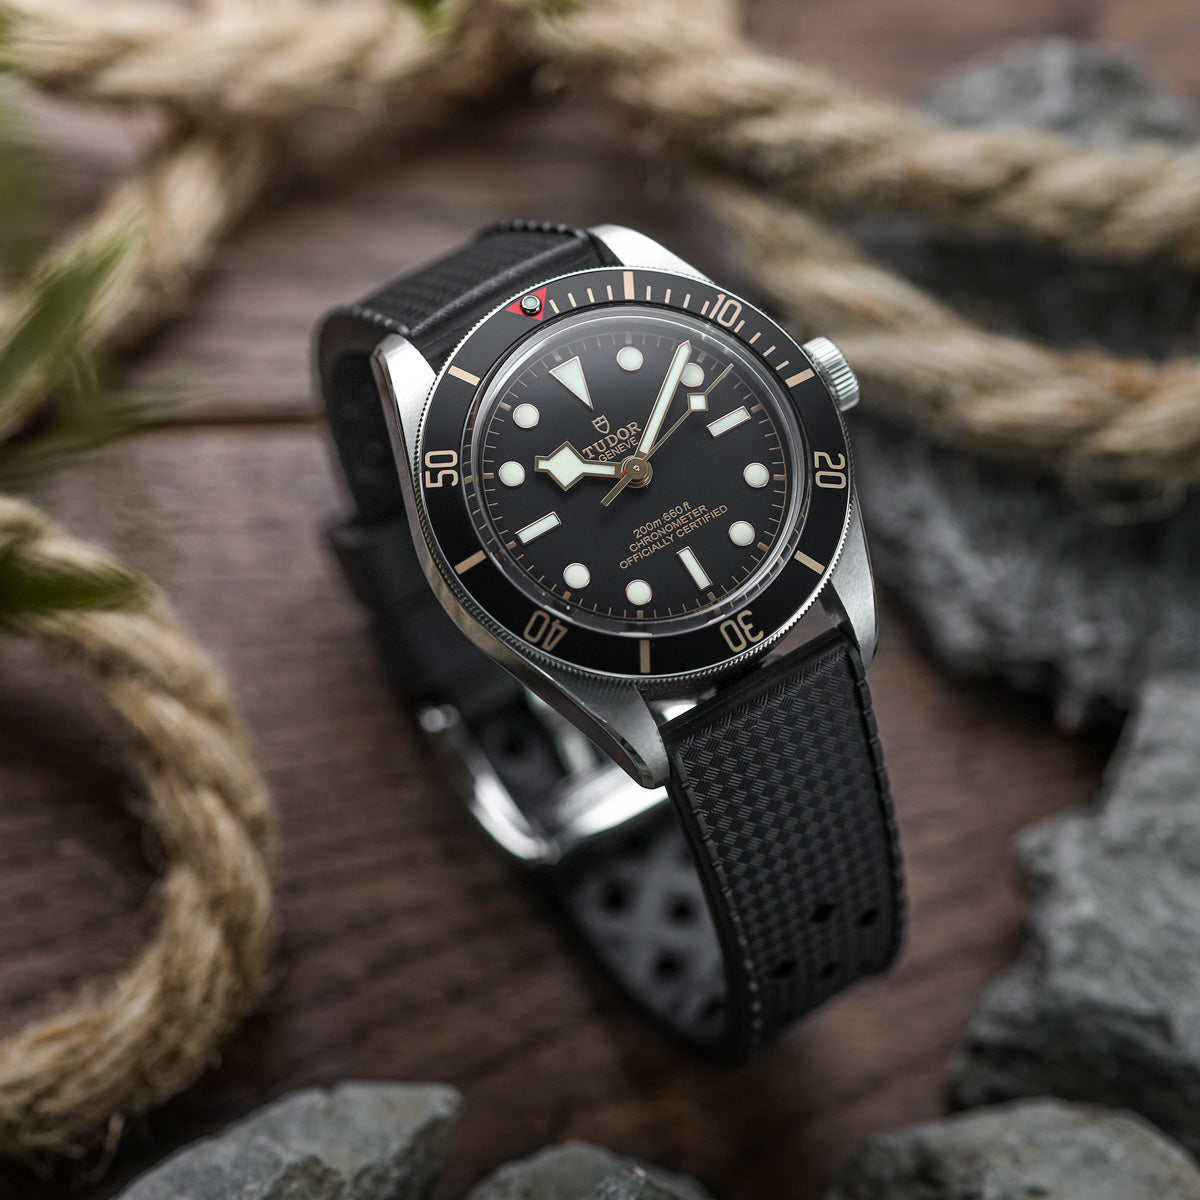 ZULUDIVER Special Rubber Dive Watch Strap Pack - additional image 3